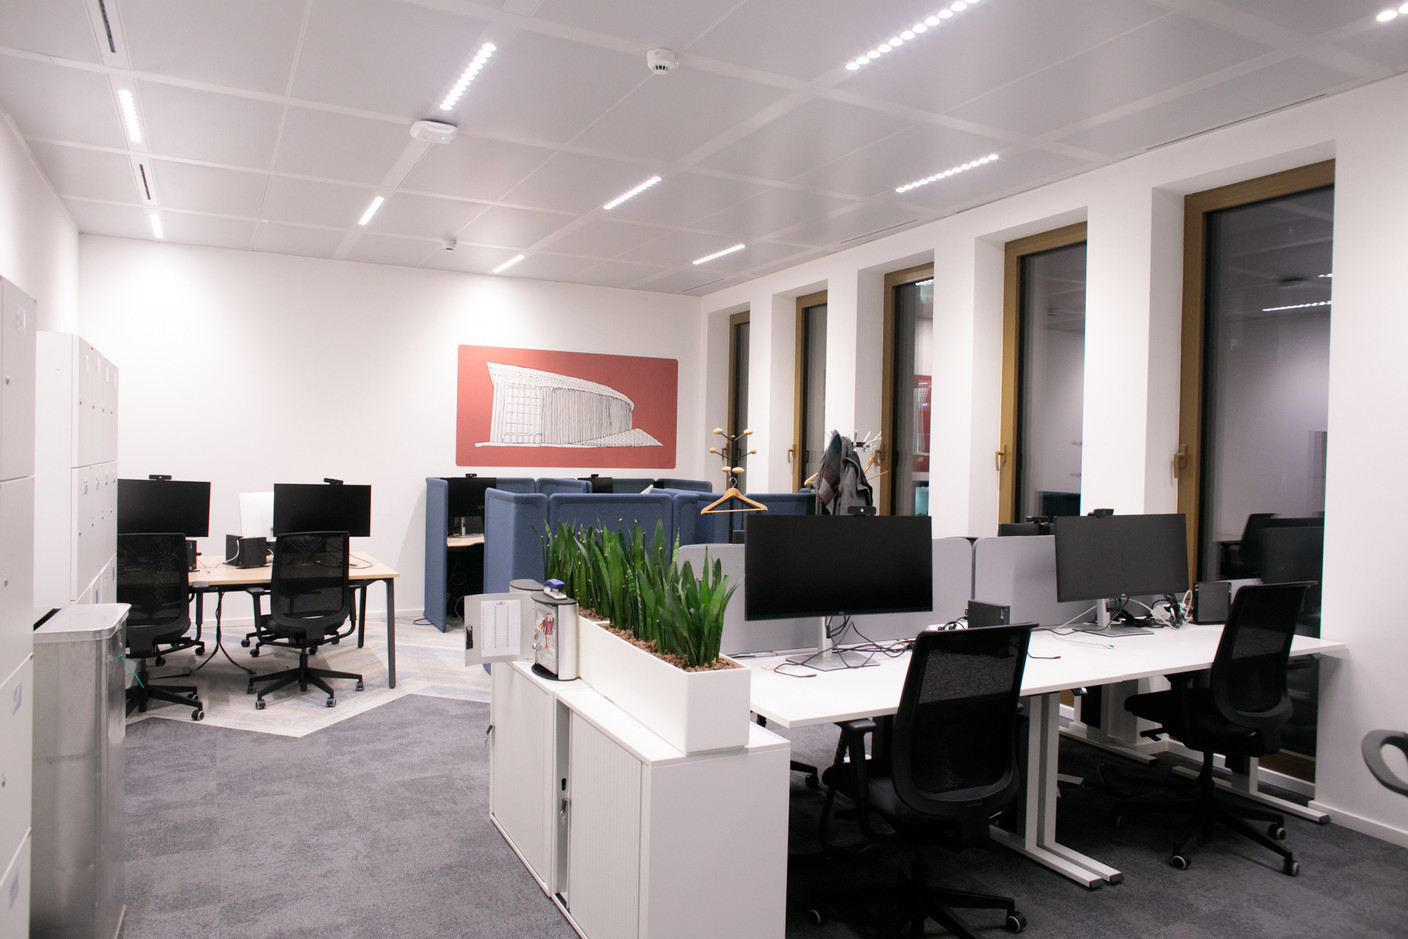 View of HSBC’s new office space in Cloche d’Or. Photo: Matic Zorman/Maison Moderne